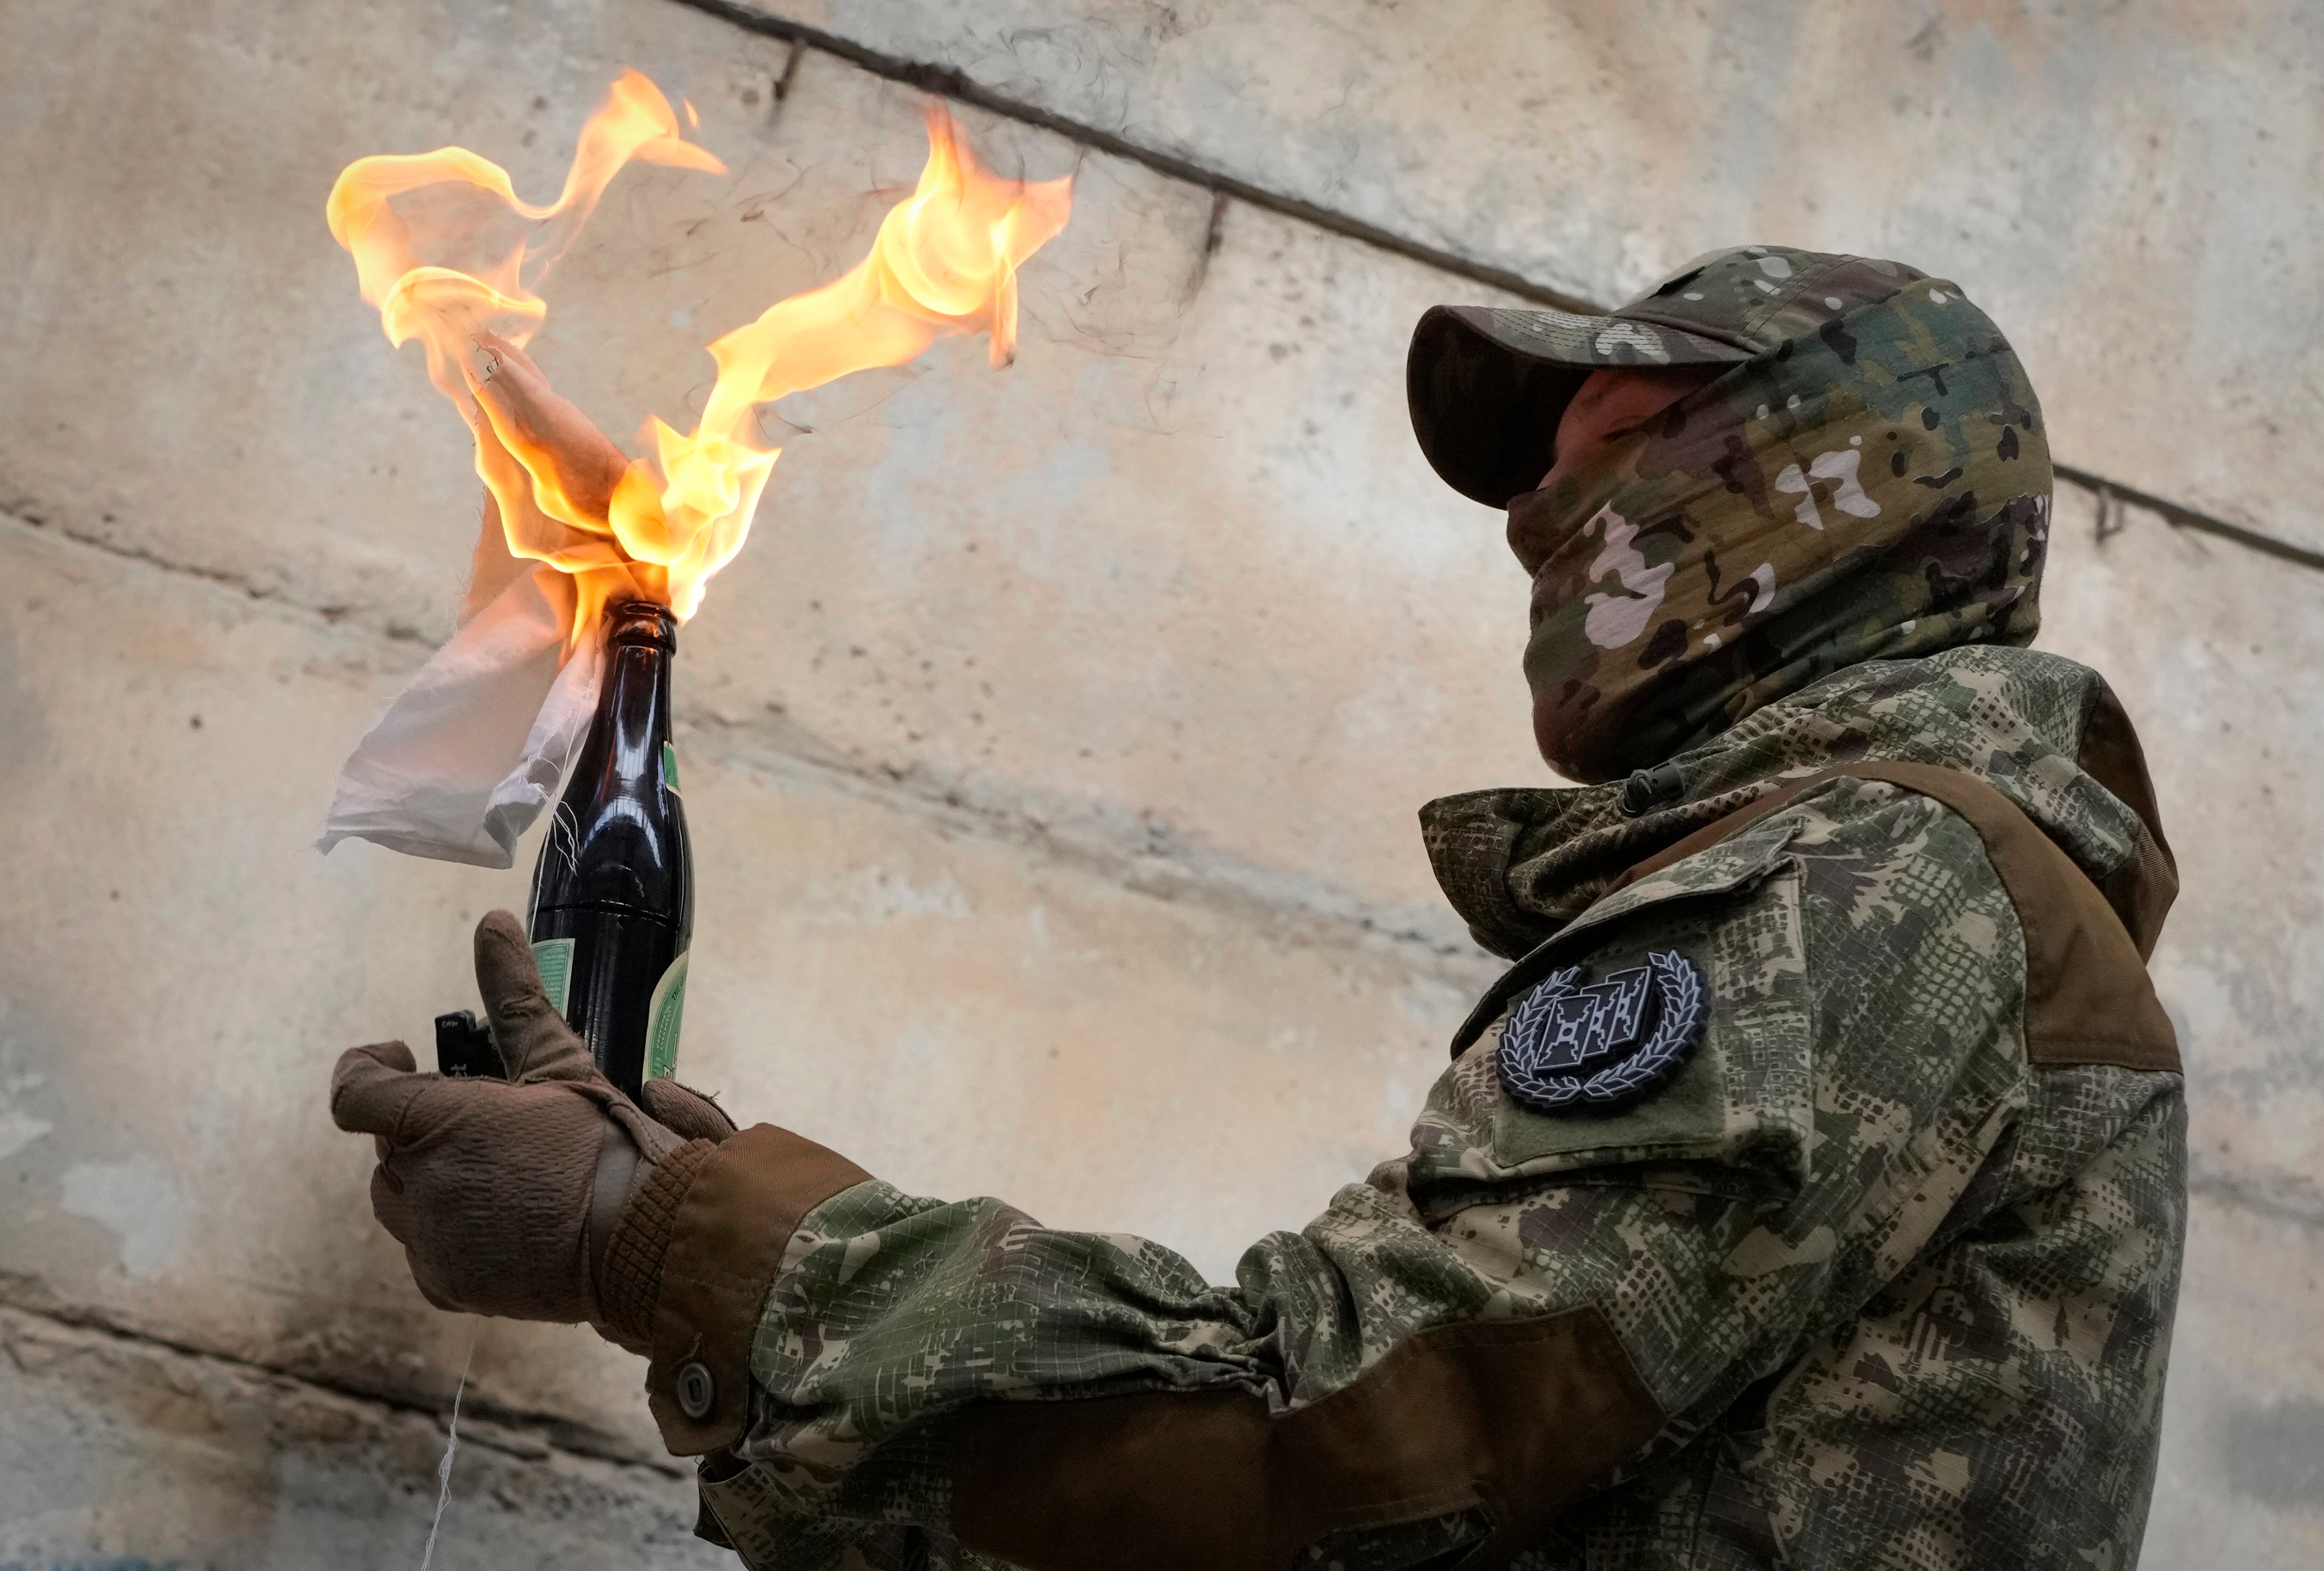 A resident prepares to use a Molotov cocktail during an all-Ukrainian training campaign